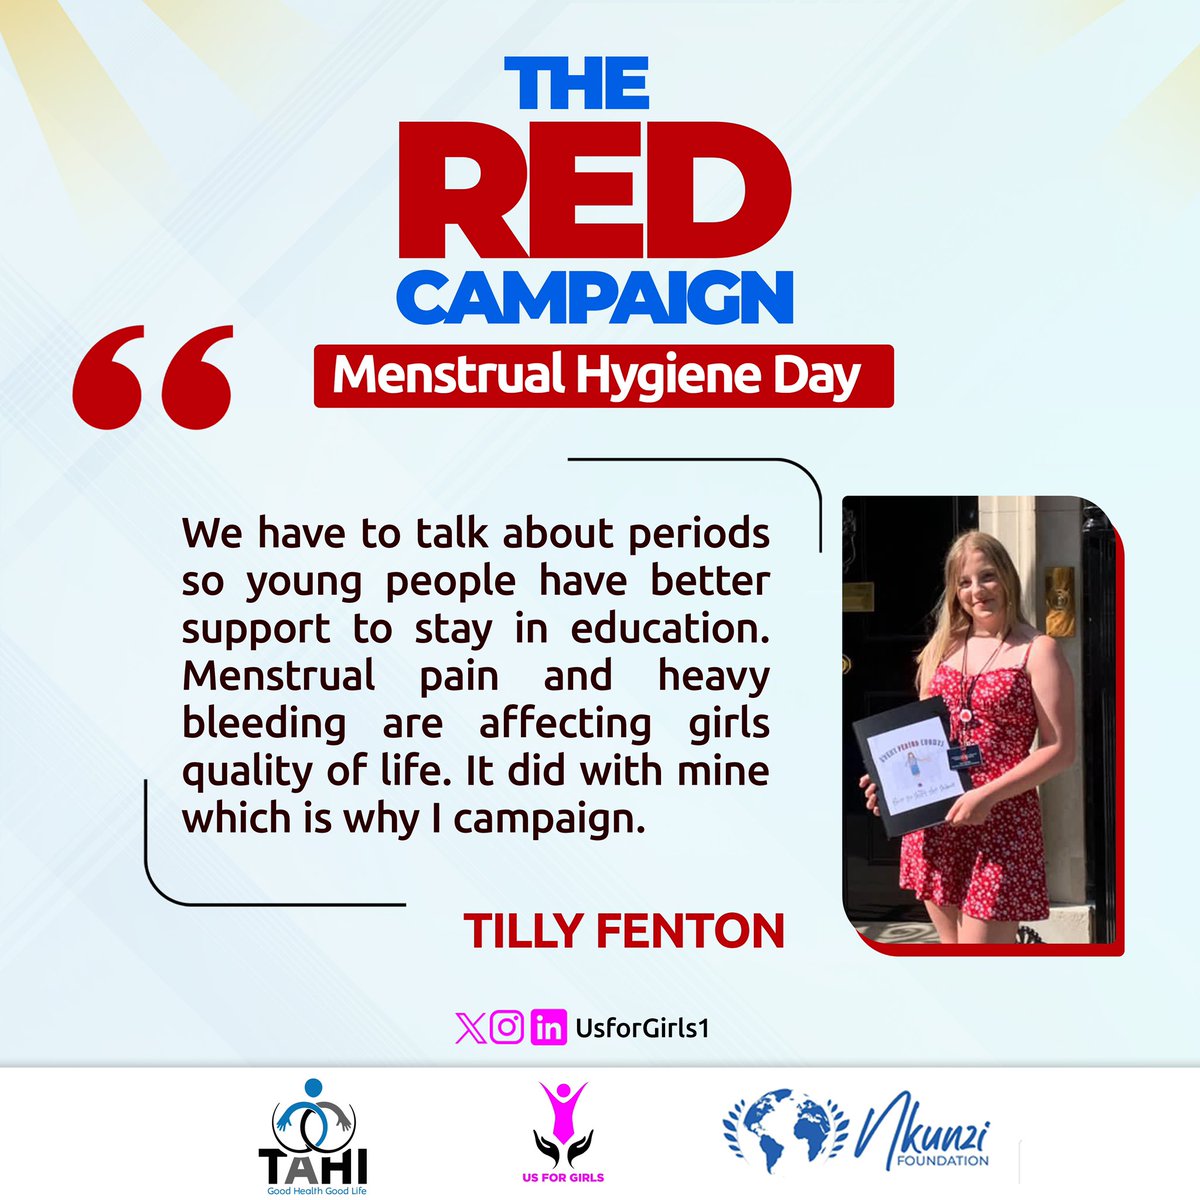 @tillyfenton emphasizes the importance of destigmatizing discussions about menstruation to ensure that young people receive the support necessary to remain in school.#RedCampaign #EndPeriodPoverty